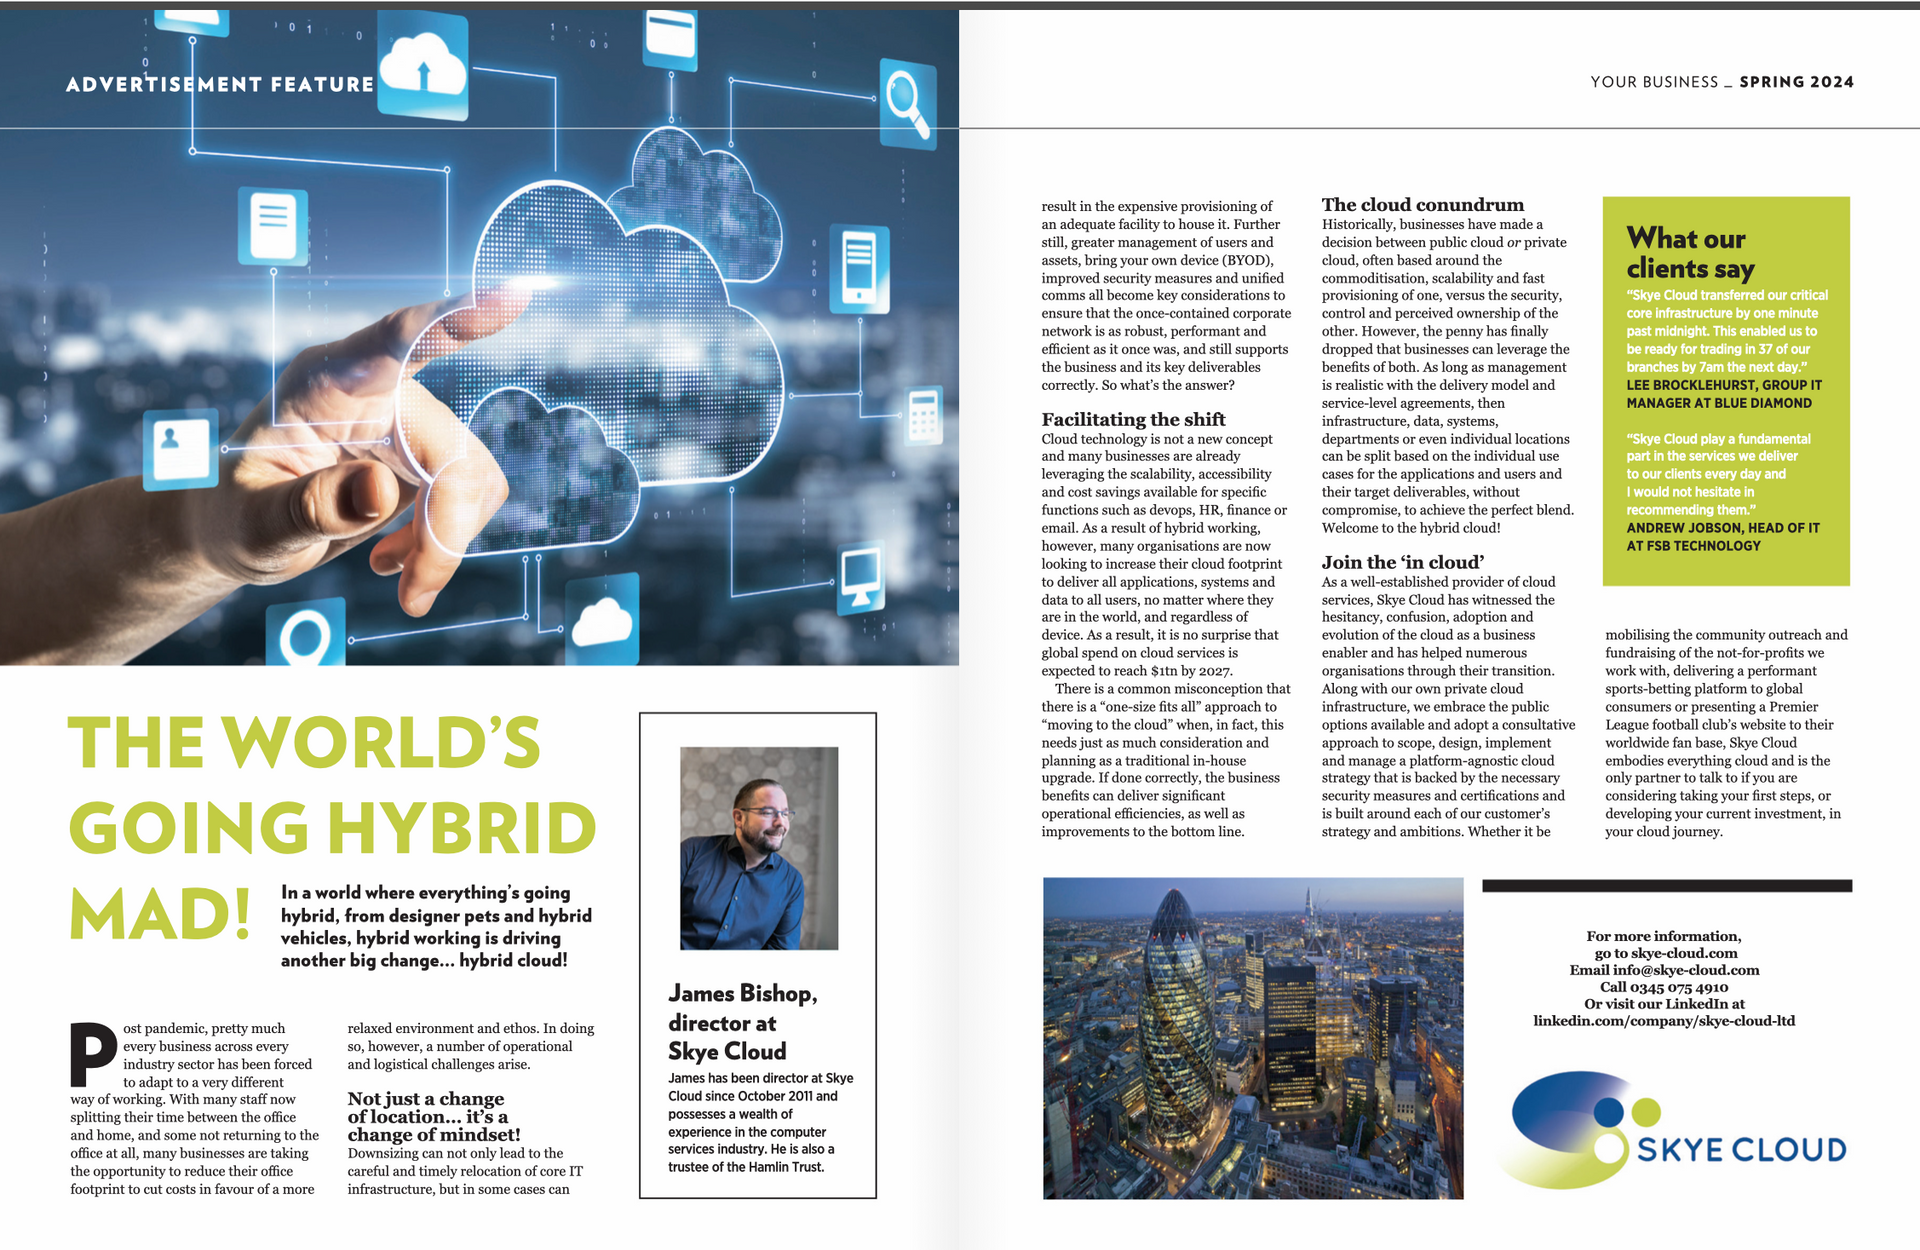 James Bishop's article in Your Business Spring 2024